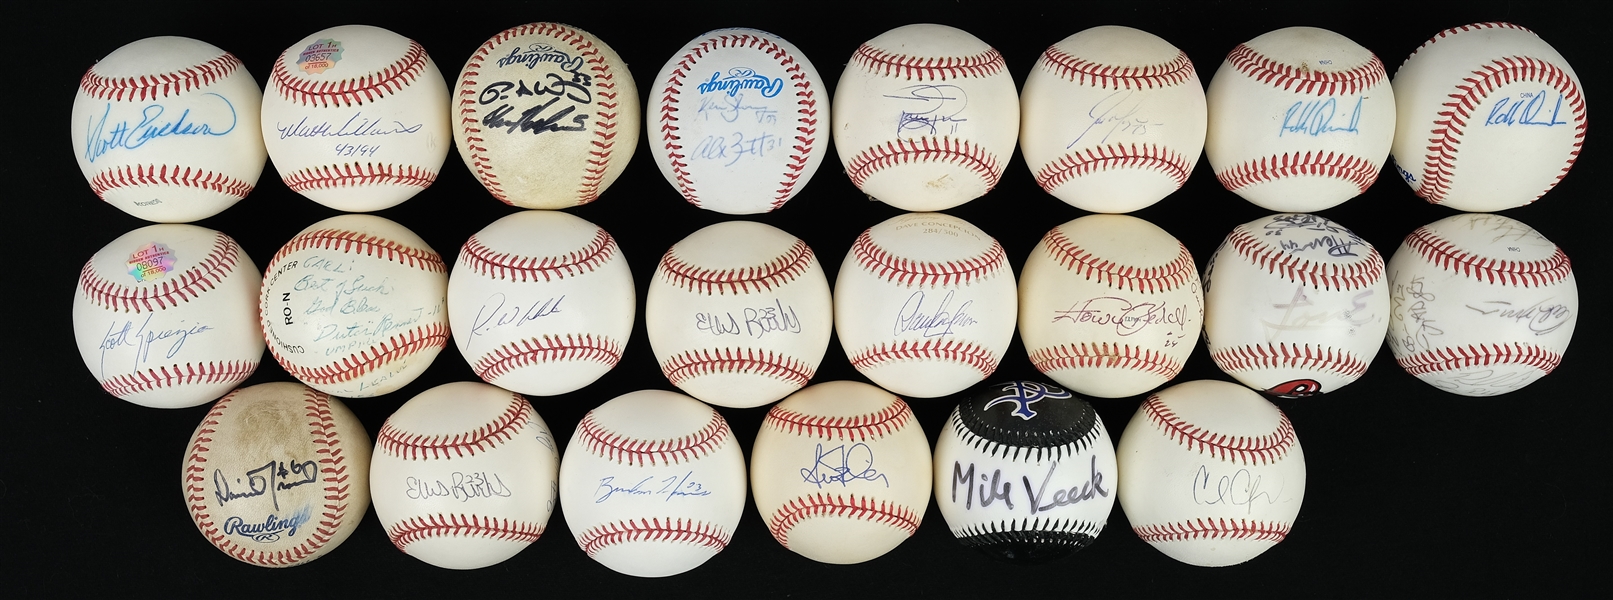 Collection of 22 Autographed Baseballs